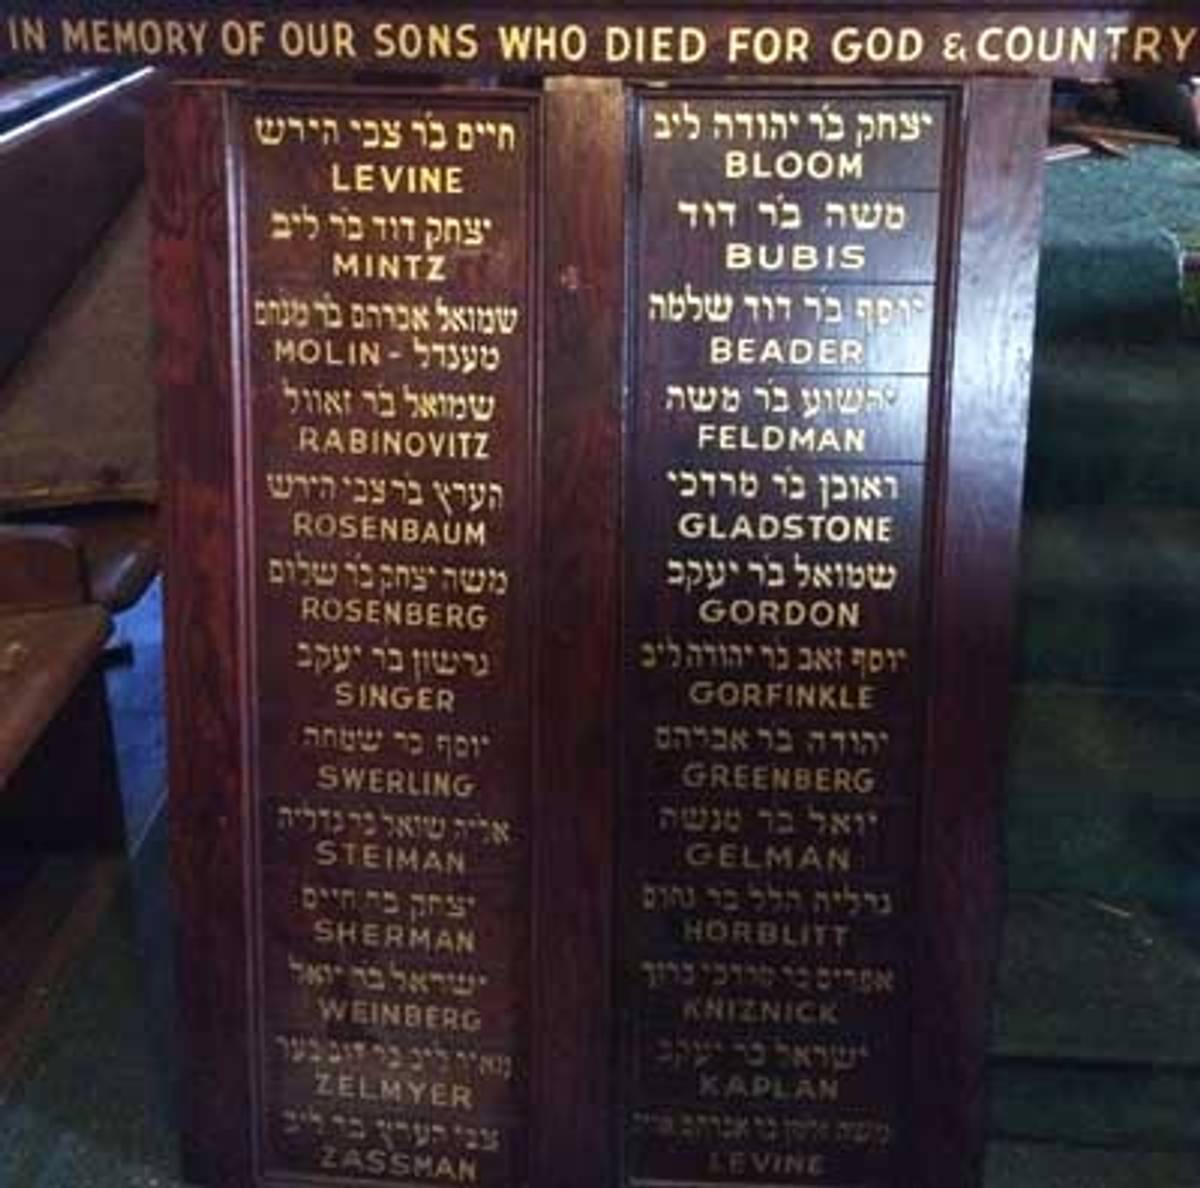 Tifereth Israel’s plaque honoring congregants killed in action during WWII. (Photo: Ira Novoselsky)